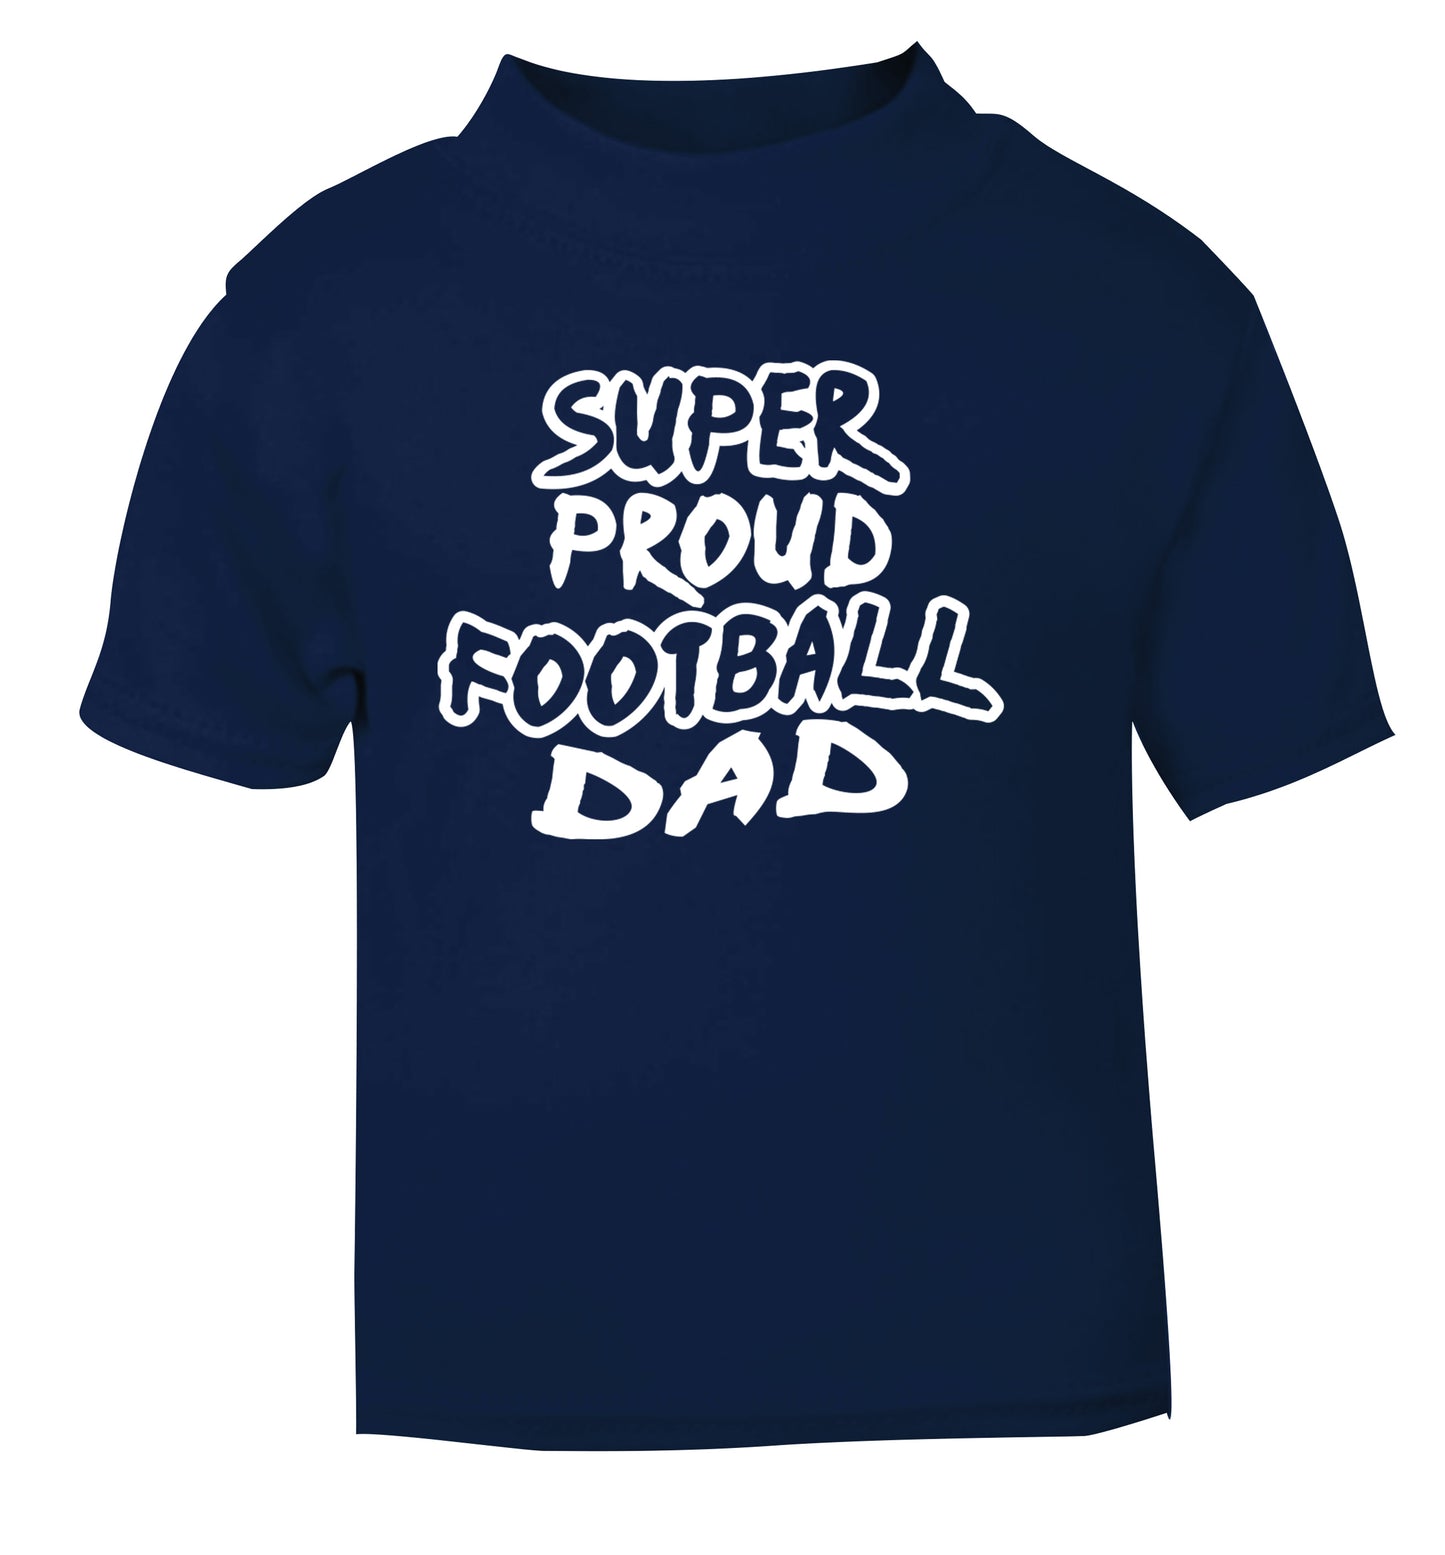 Super proud football dad navy Baby Toddler Tshirt 2 Years